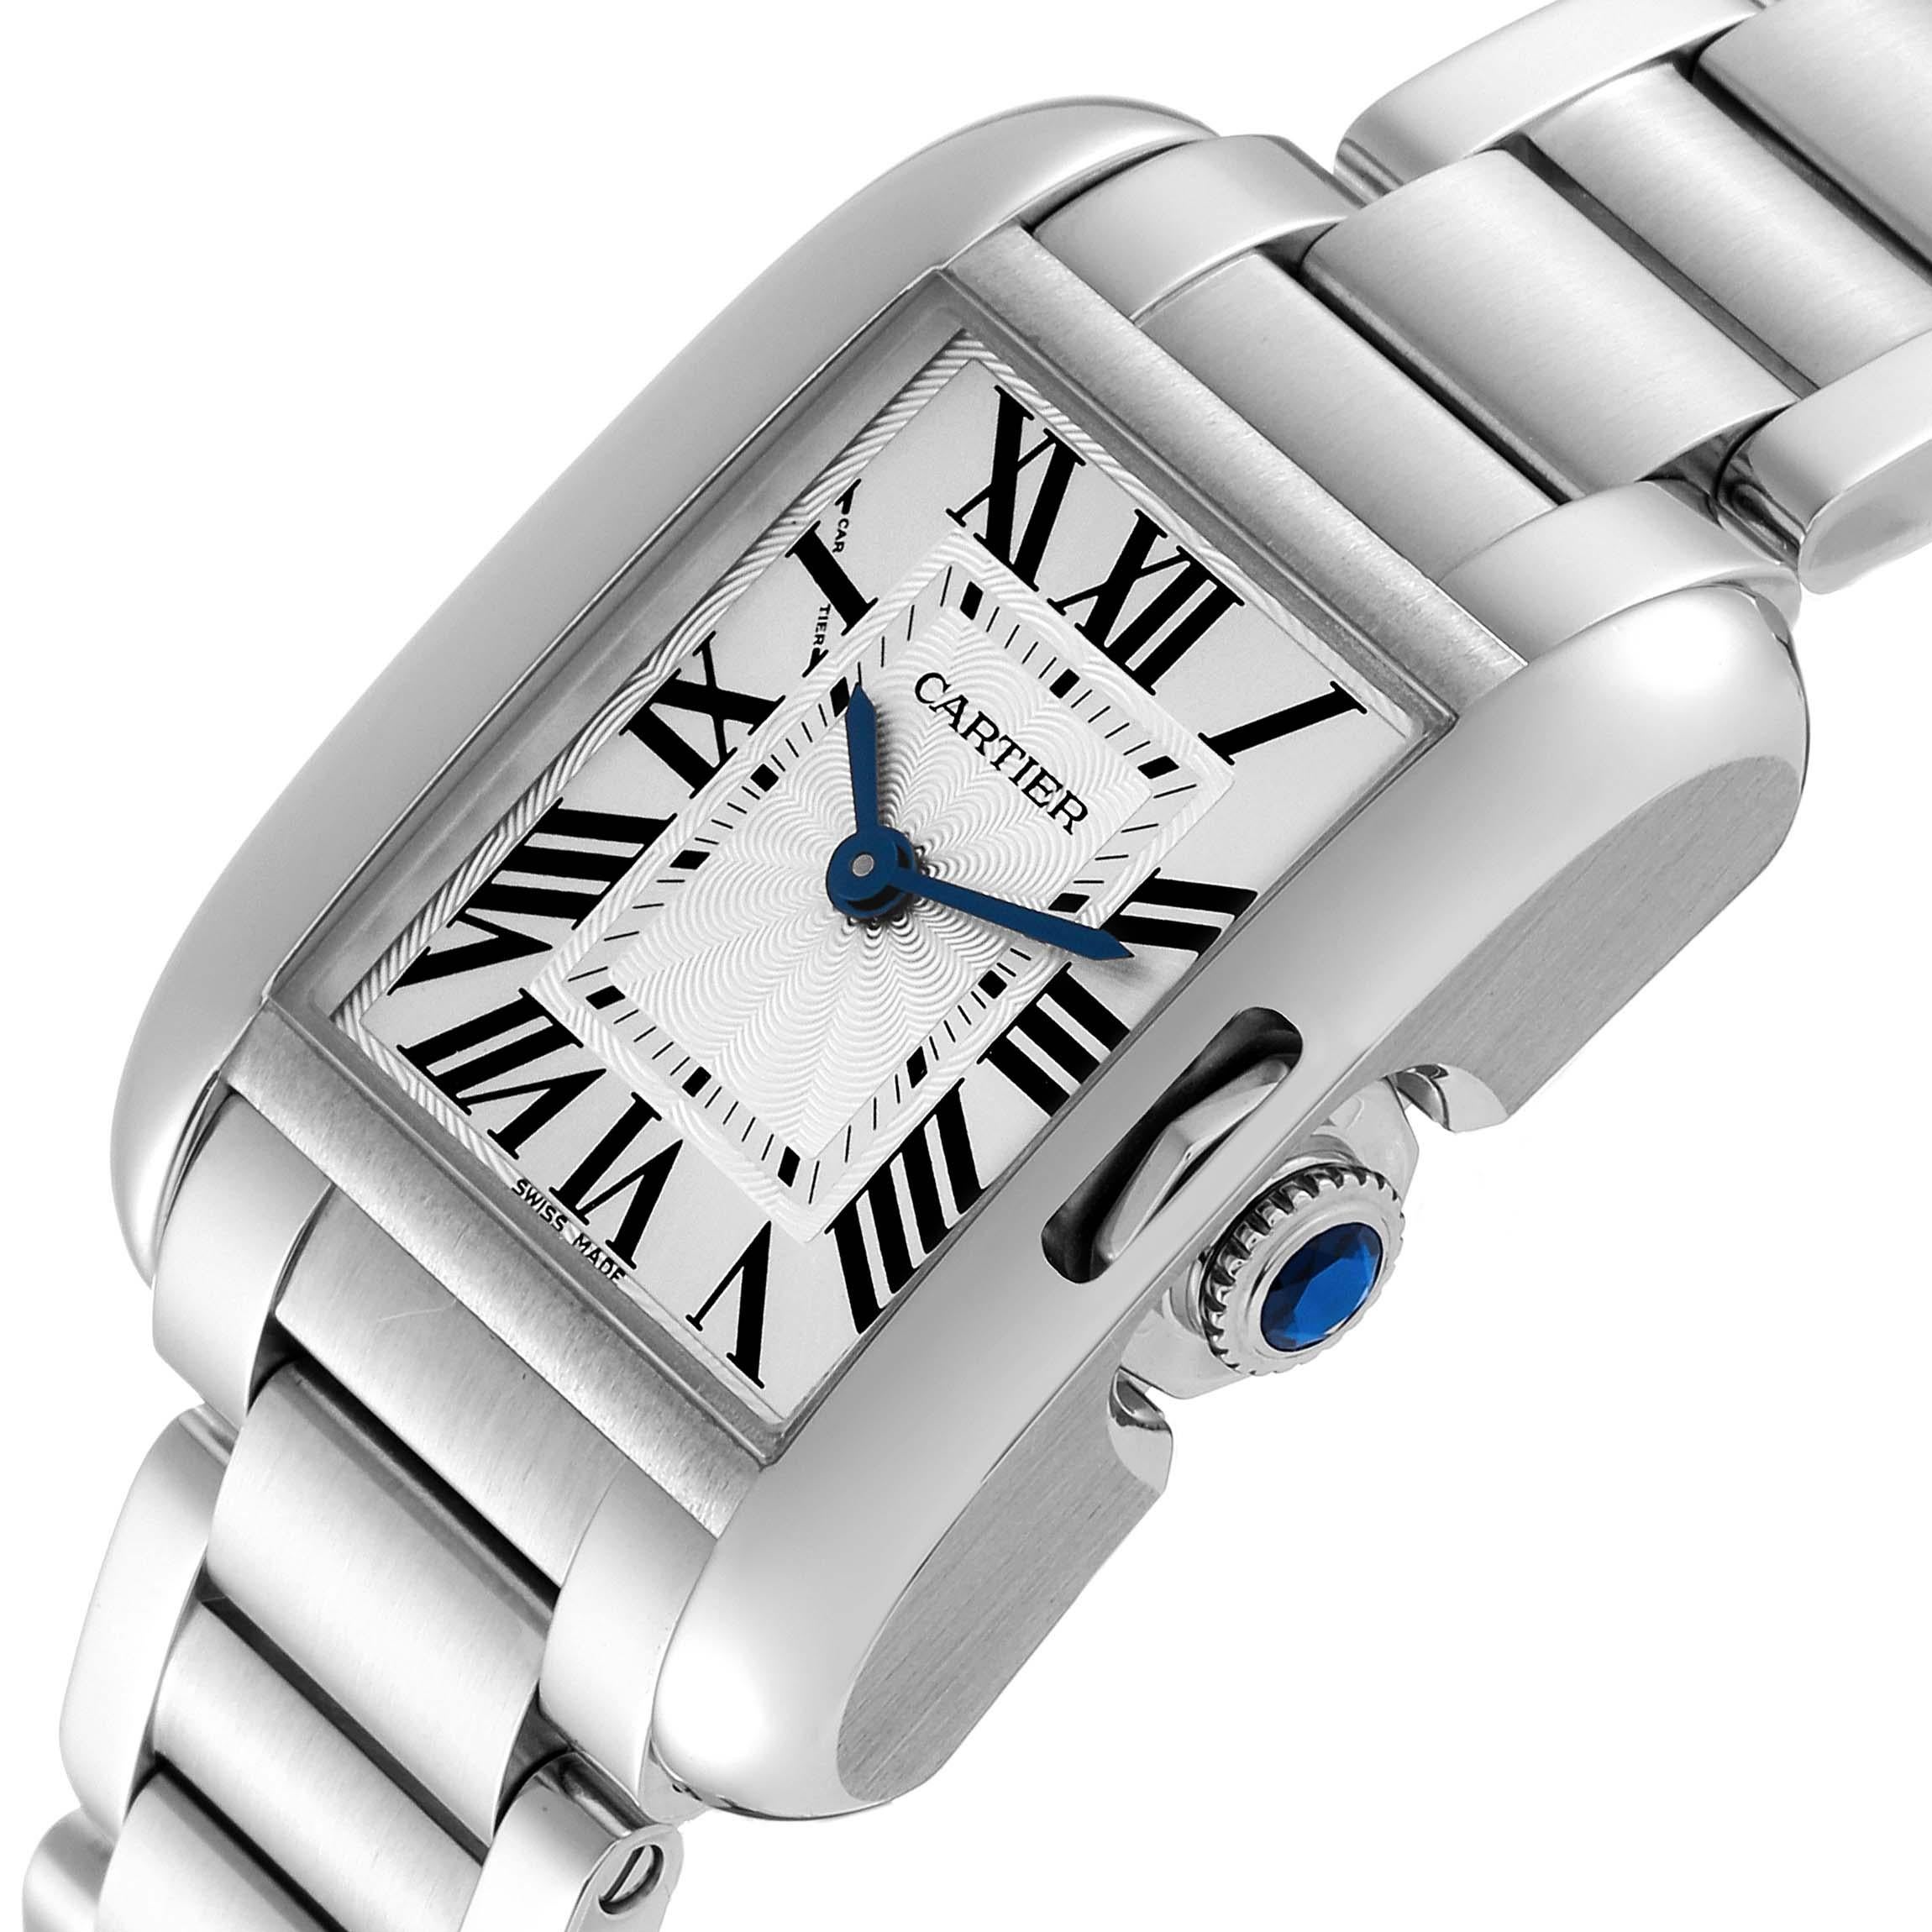 Cartier Tank Anglaise Small Silver Dial Steel Ladies Watch W5310022. Quartz movement. Stainless steel case 30.2 x 22.7 mm. Circular grained crown set with the blue spinel cabochon. . Scratch resistant sapphire crystal. Flinque and silvered dial with